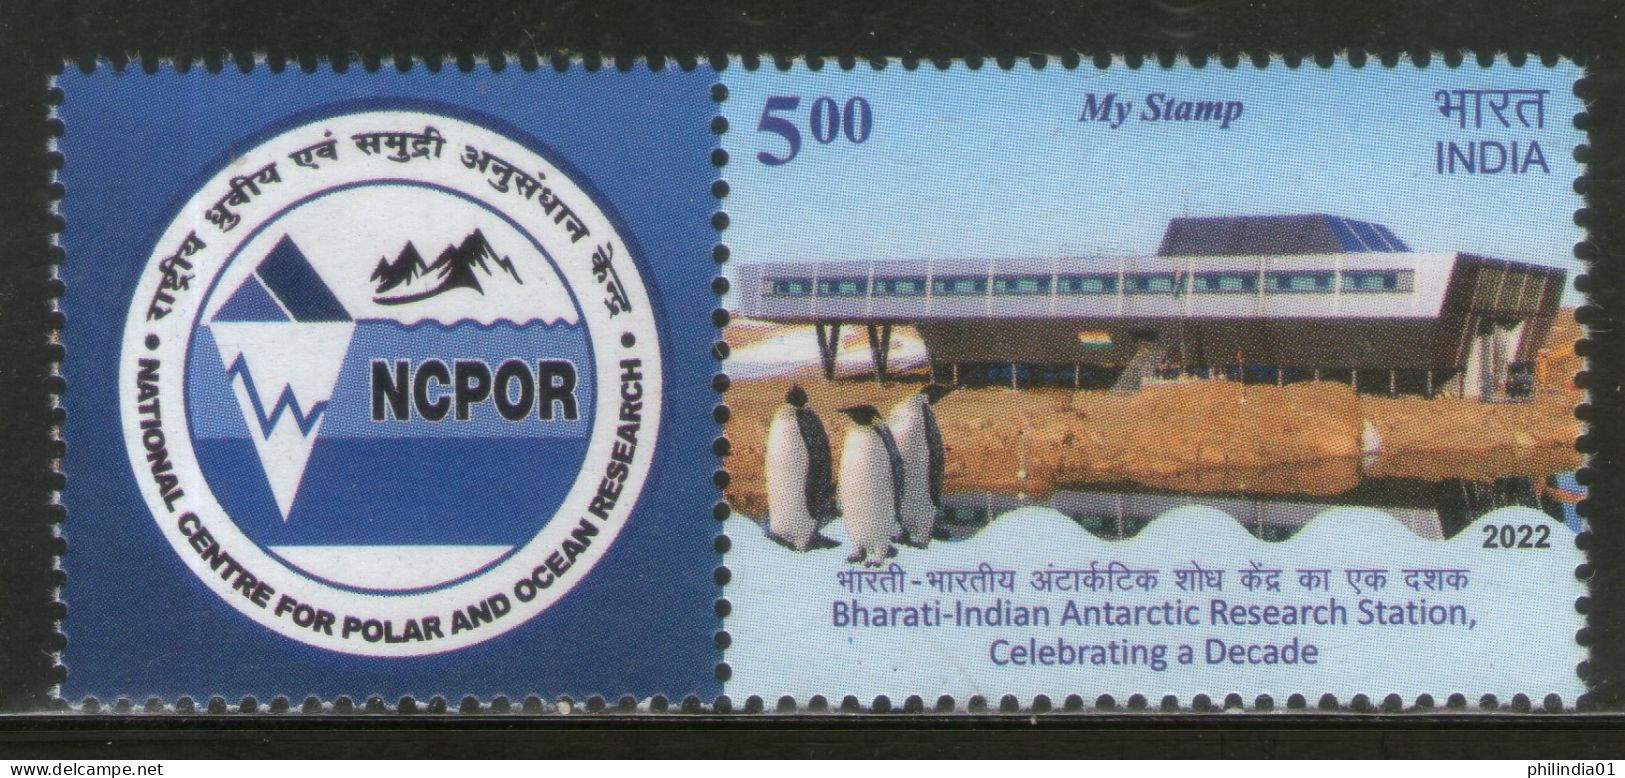 India 2022 Bharati Indian Antarctic Research Station My Stamp MNH # M100 - Research Programs